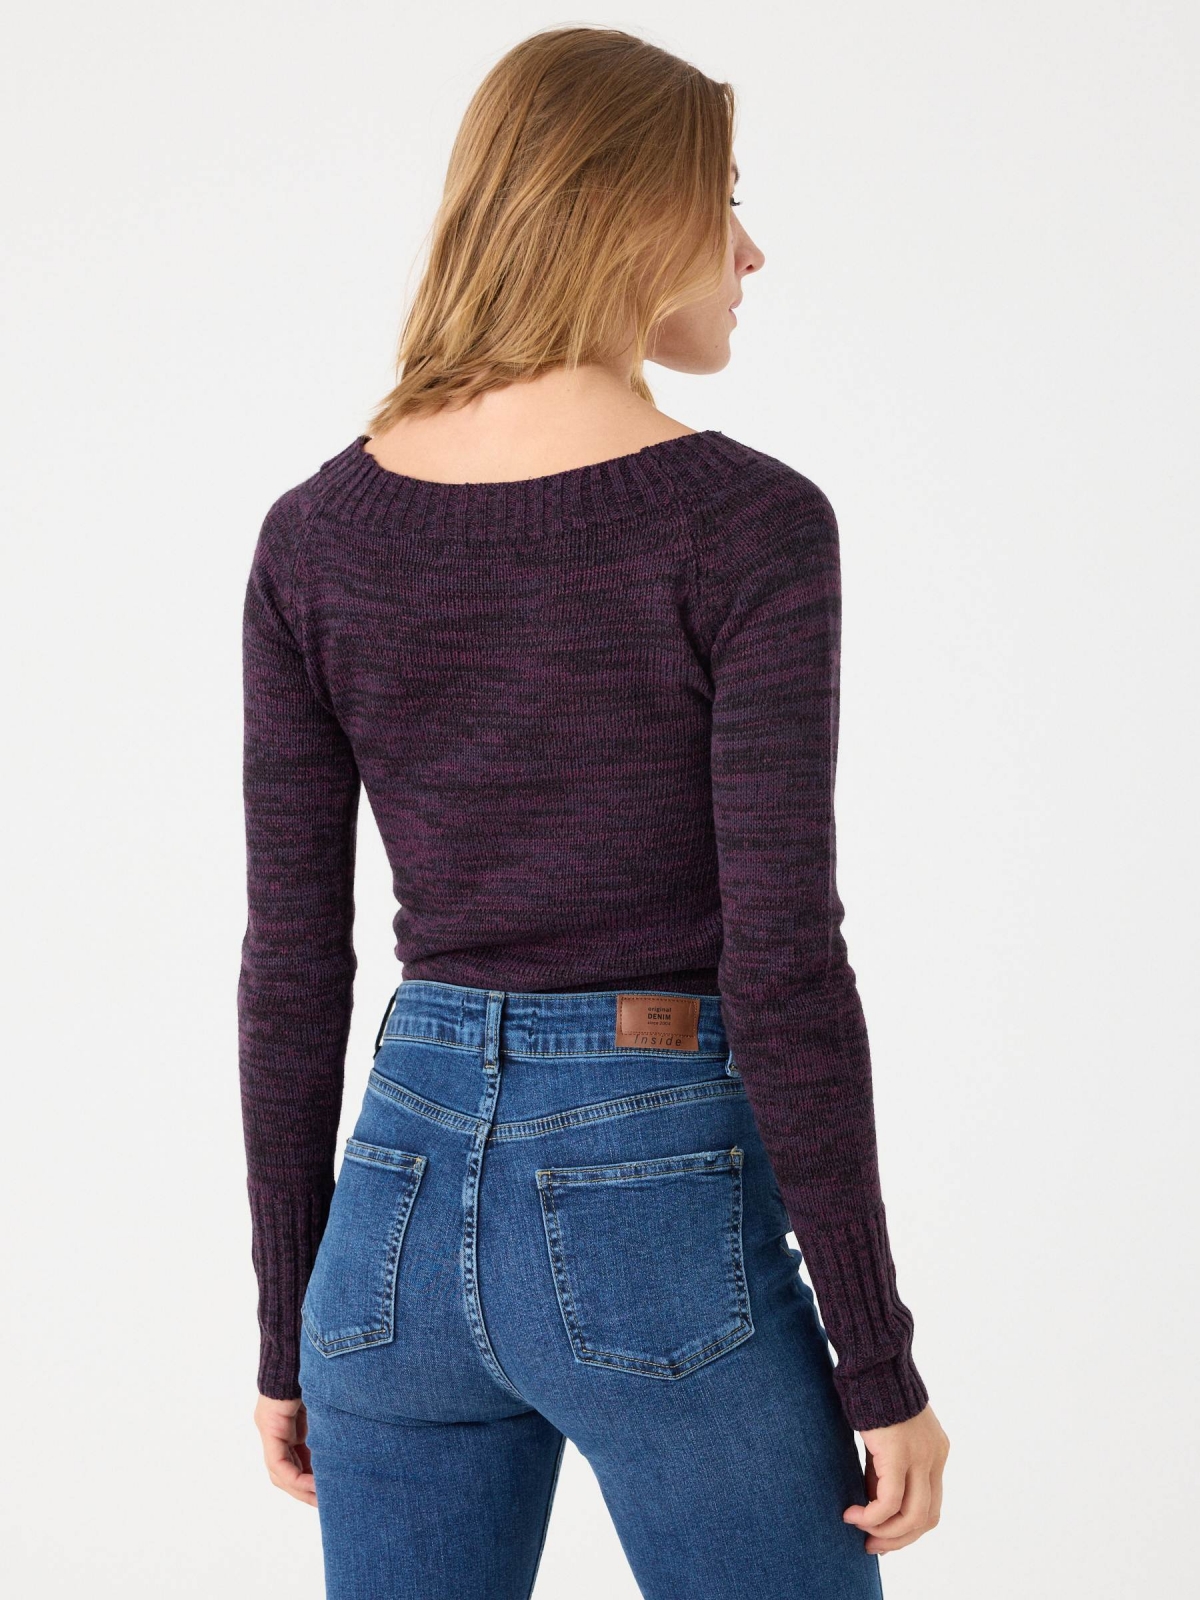 Marbled boat sweater aubergine middle back view